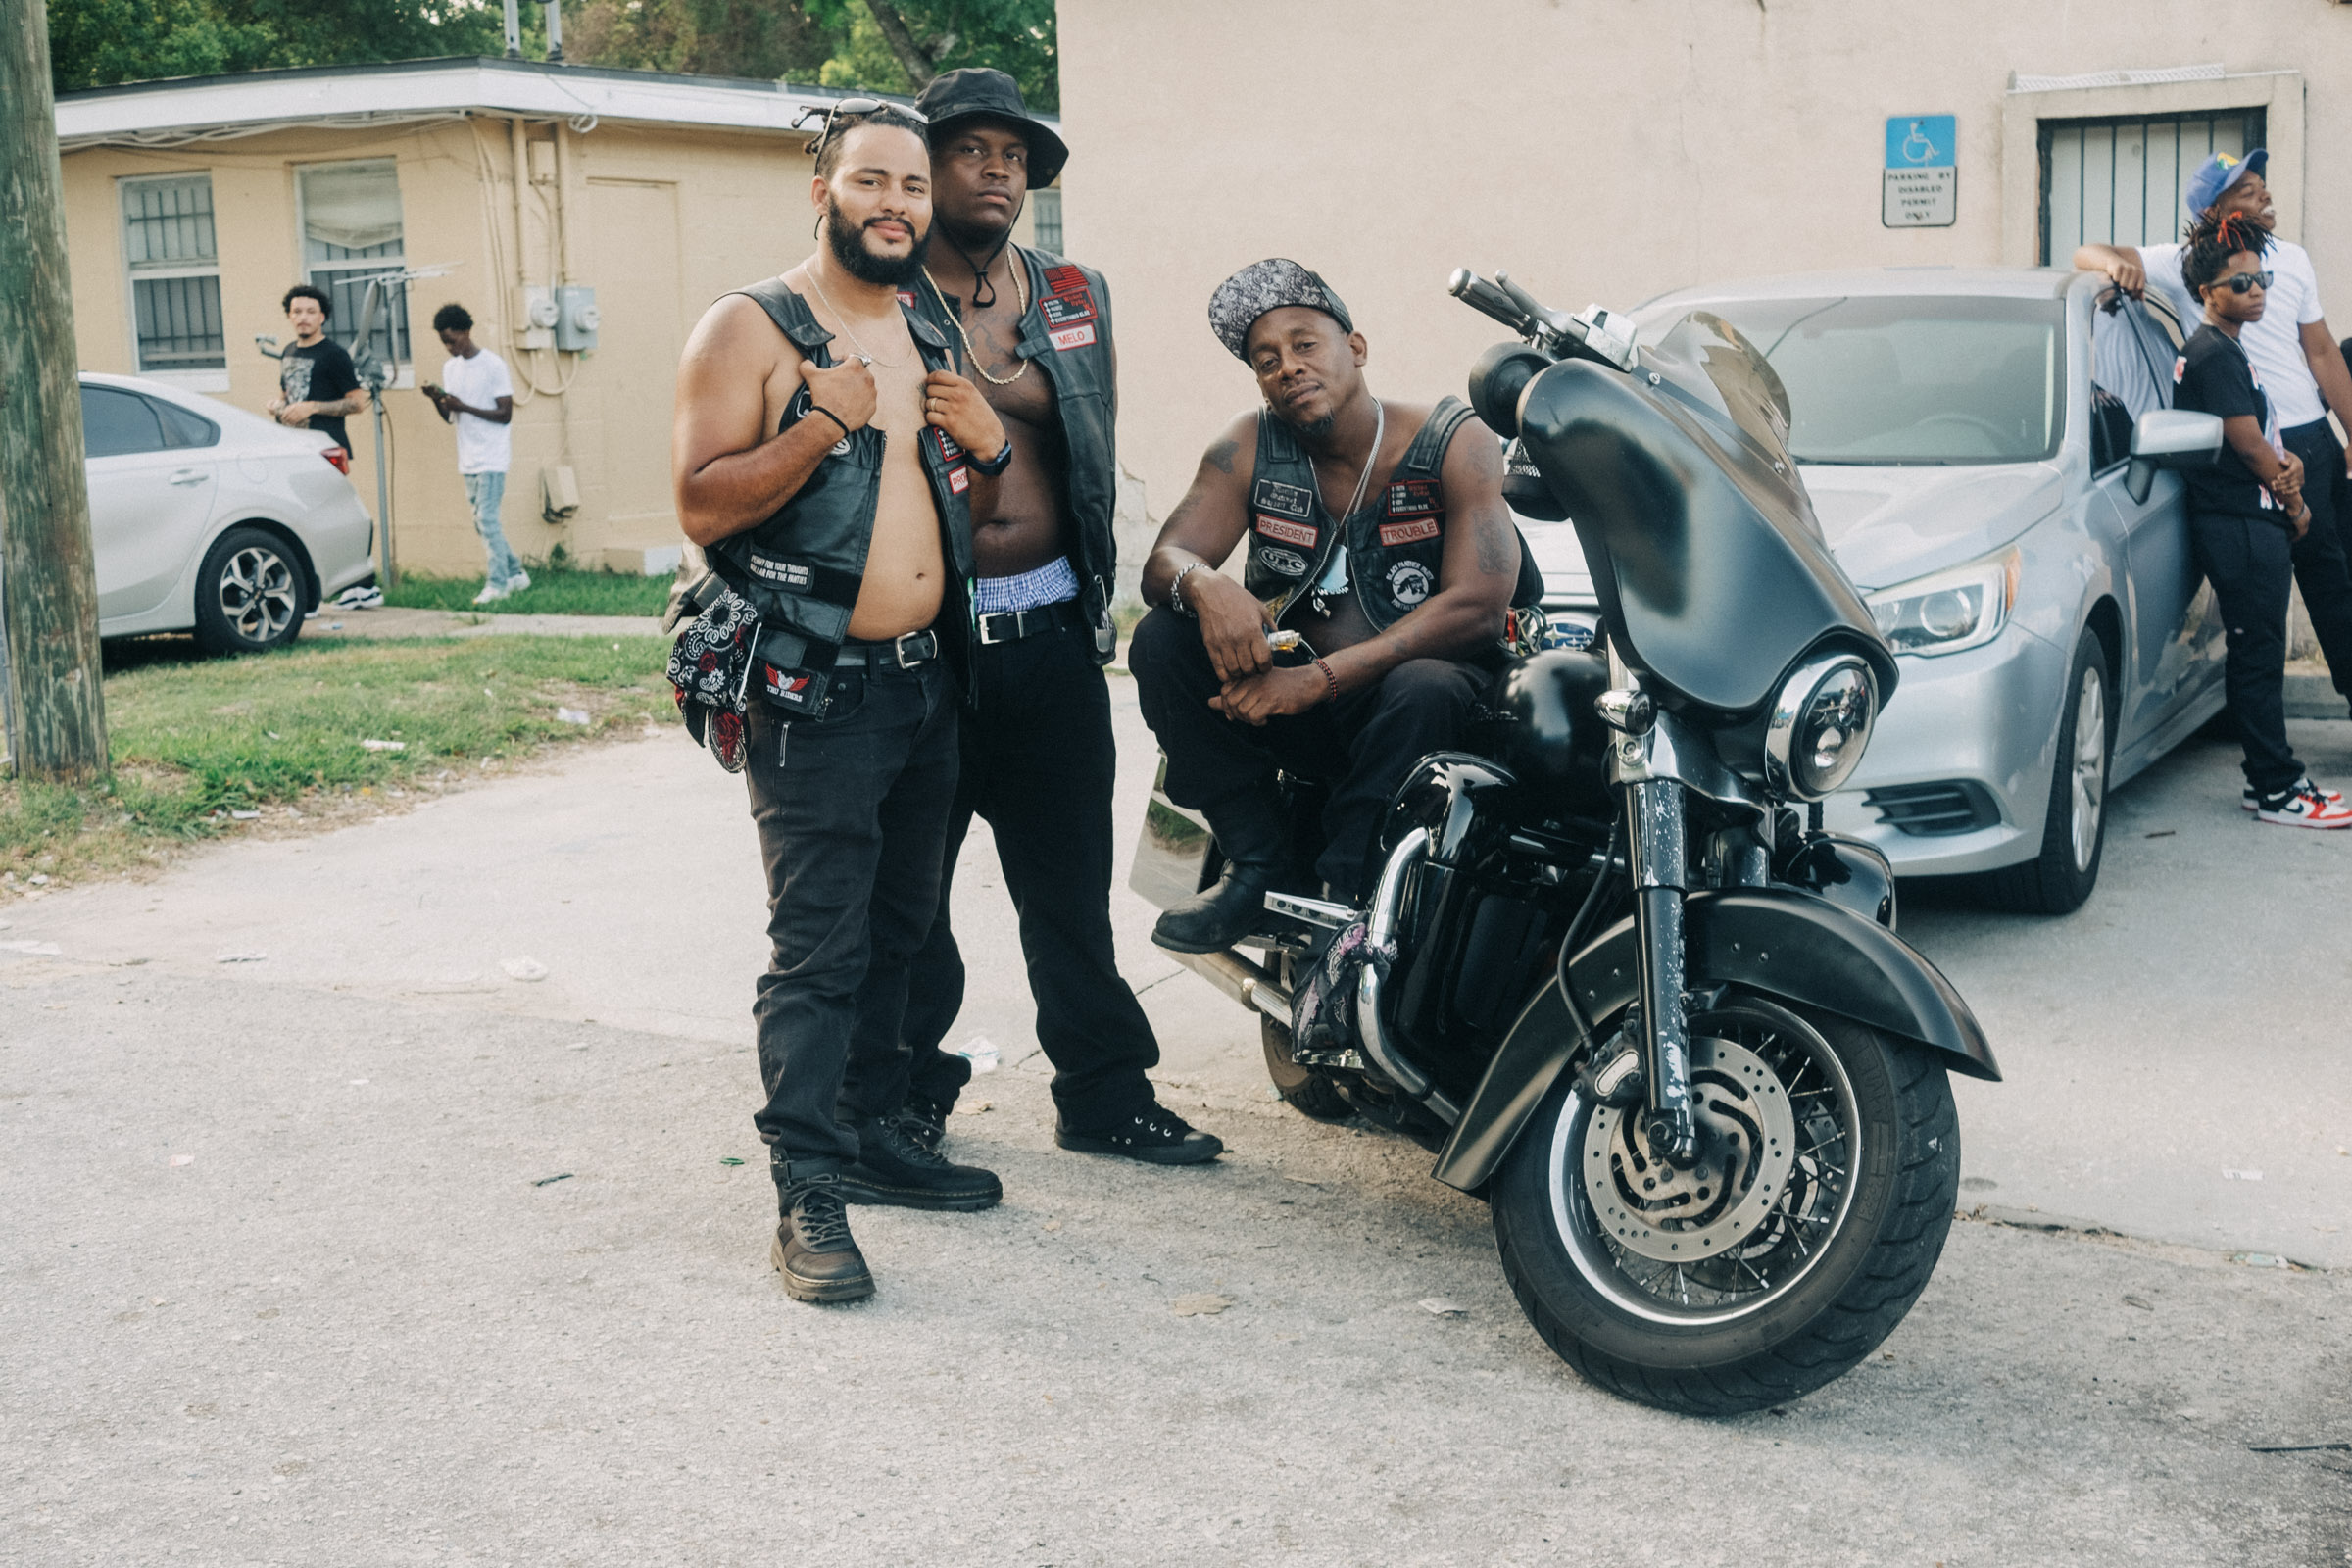 Problems, Melo and Trouble, three members of the Wicked Rydaz Motorcycle Club